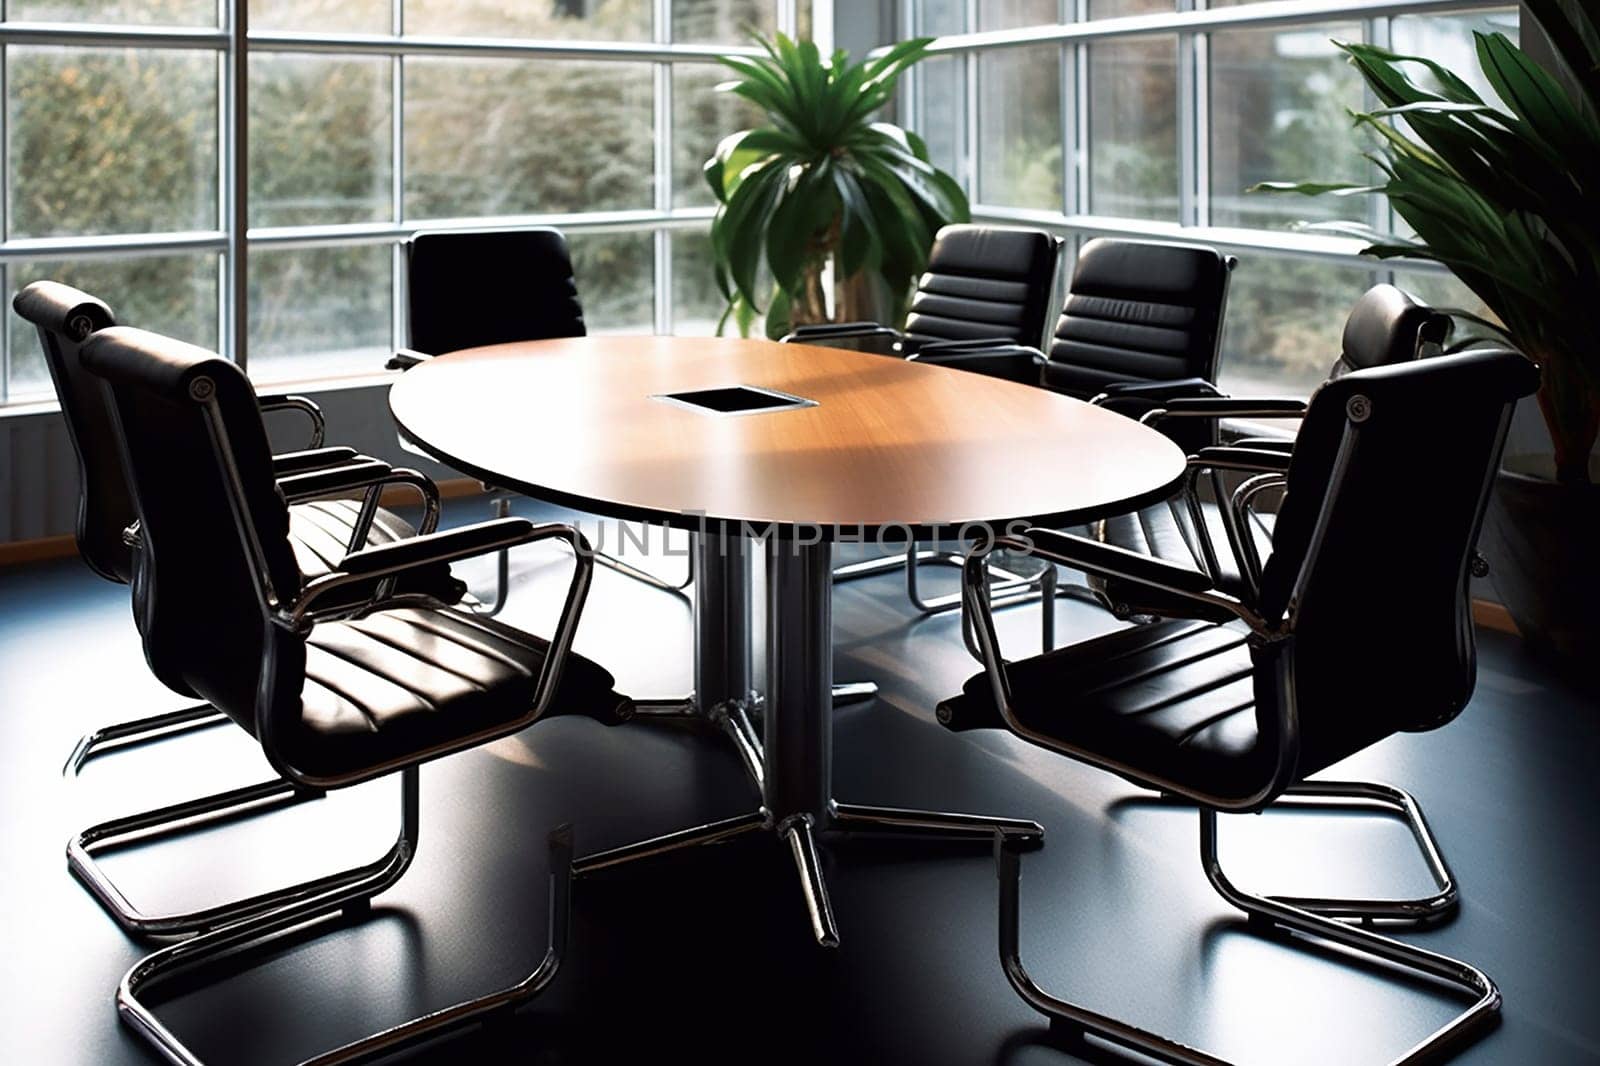 Empty and bright meeting room in a office, elegant workplace with a round table, chairs and plants and large windows